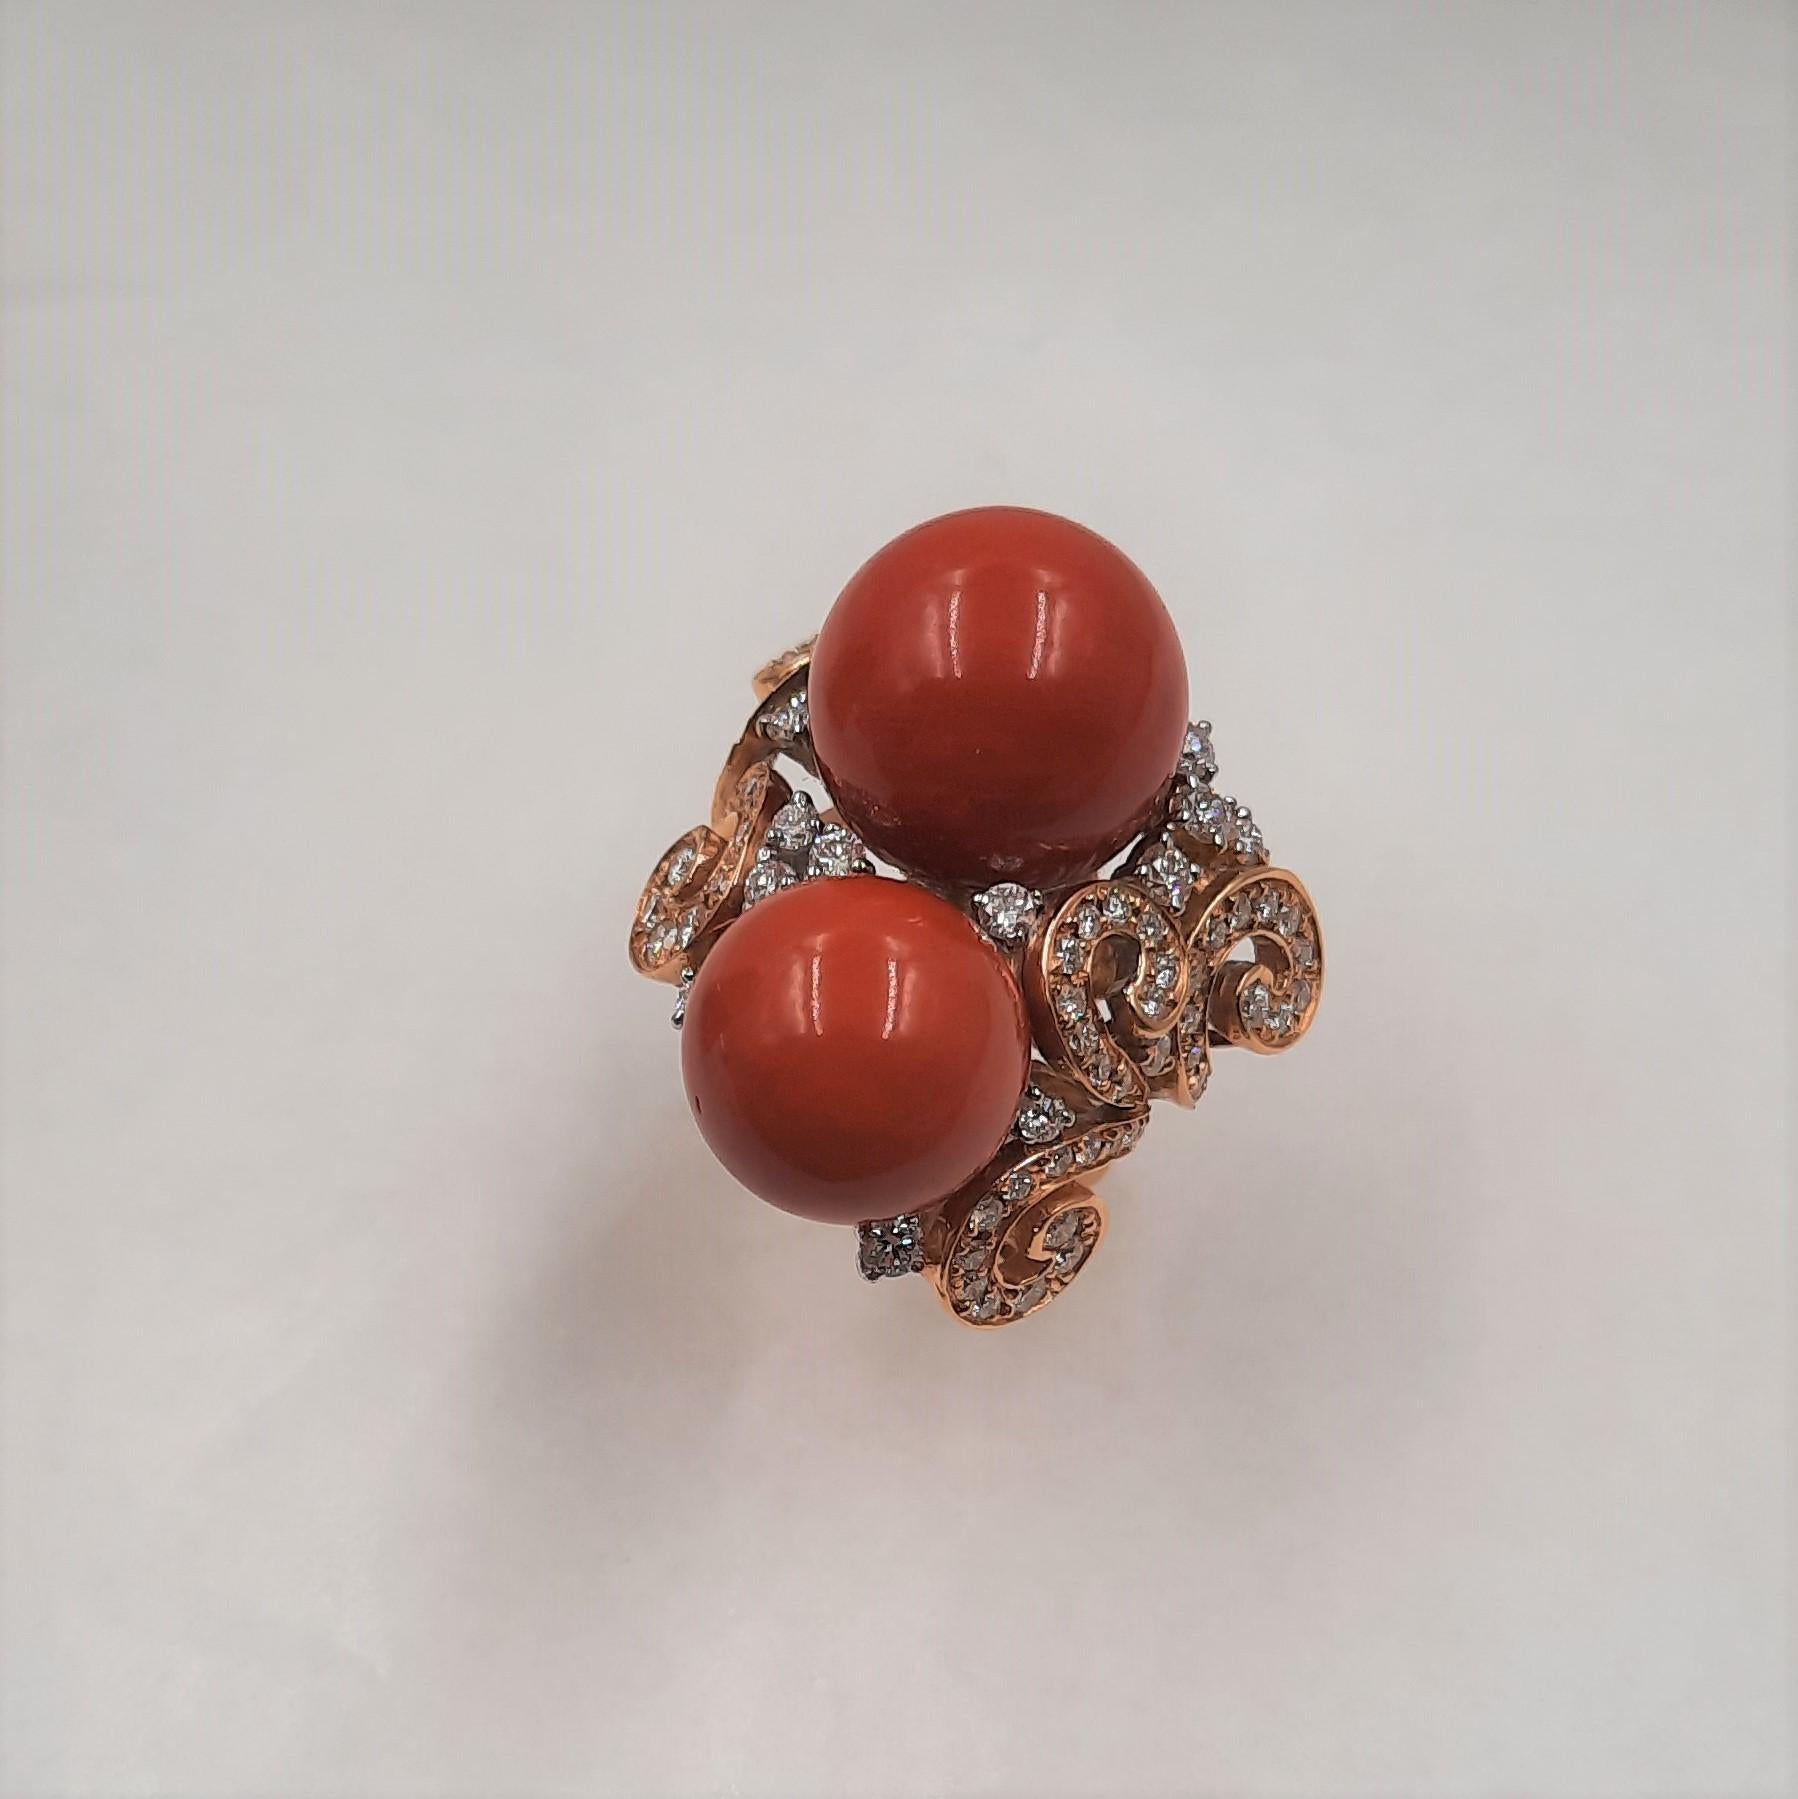 Exceptional Mediterranean coral (6.68 grams), Brilliant cut diamond (1.6 carats), 18 carats rose and white gold (11.7grams) cocktail ring. 